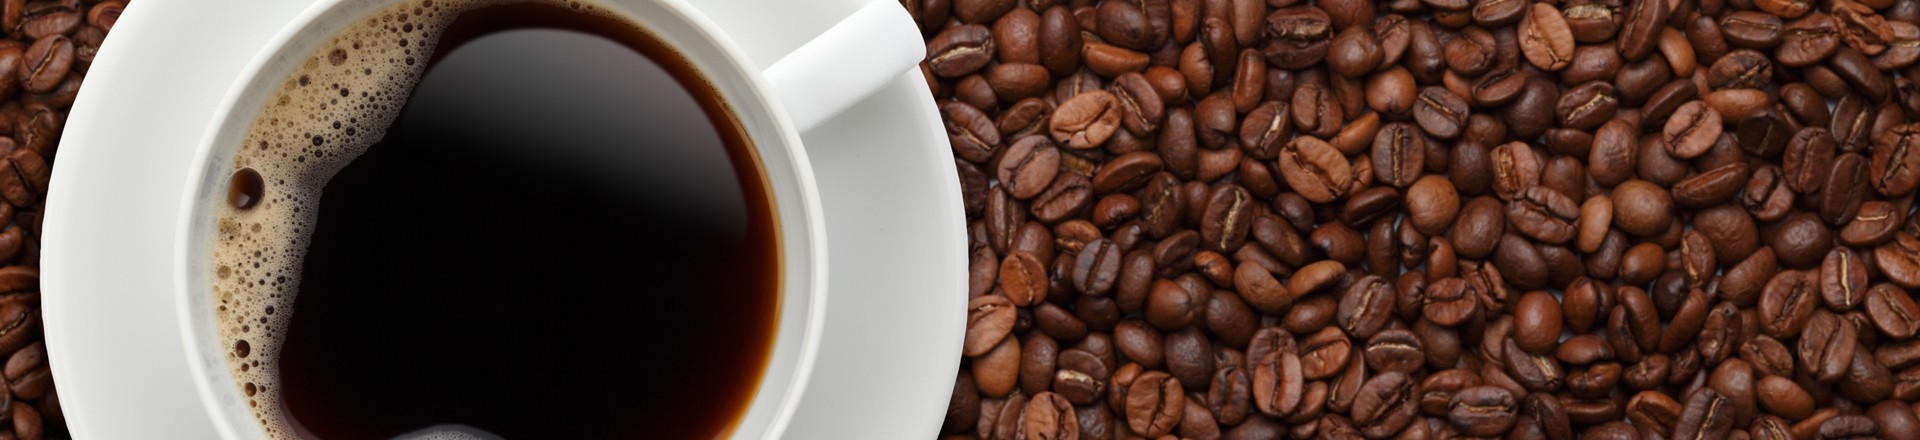 Is coffee good for you?